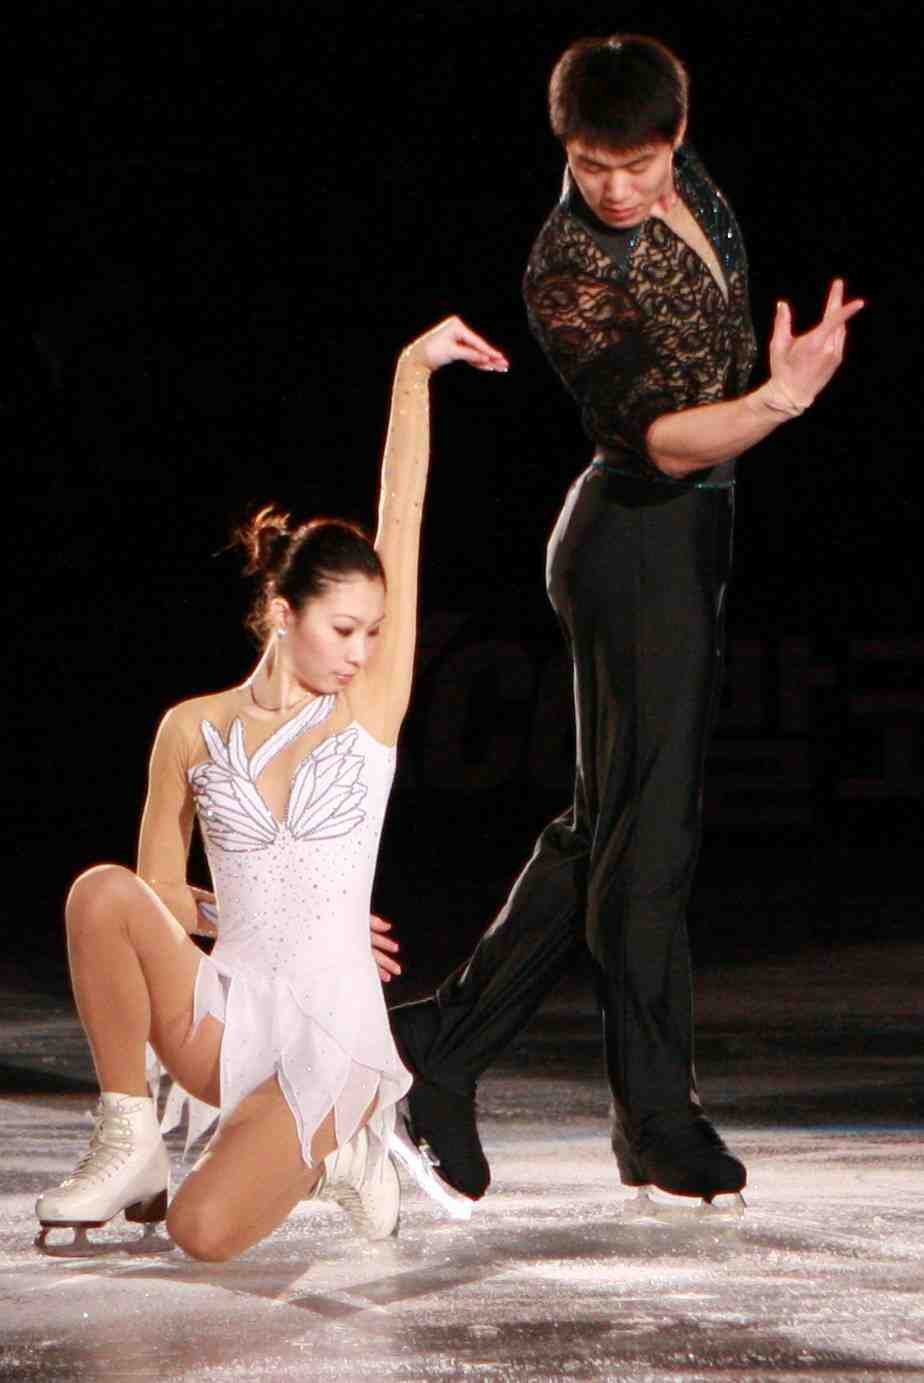 Who is the heaviest figure skater?